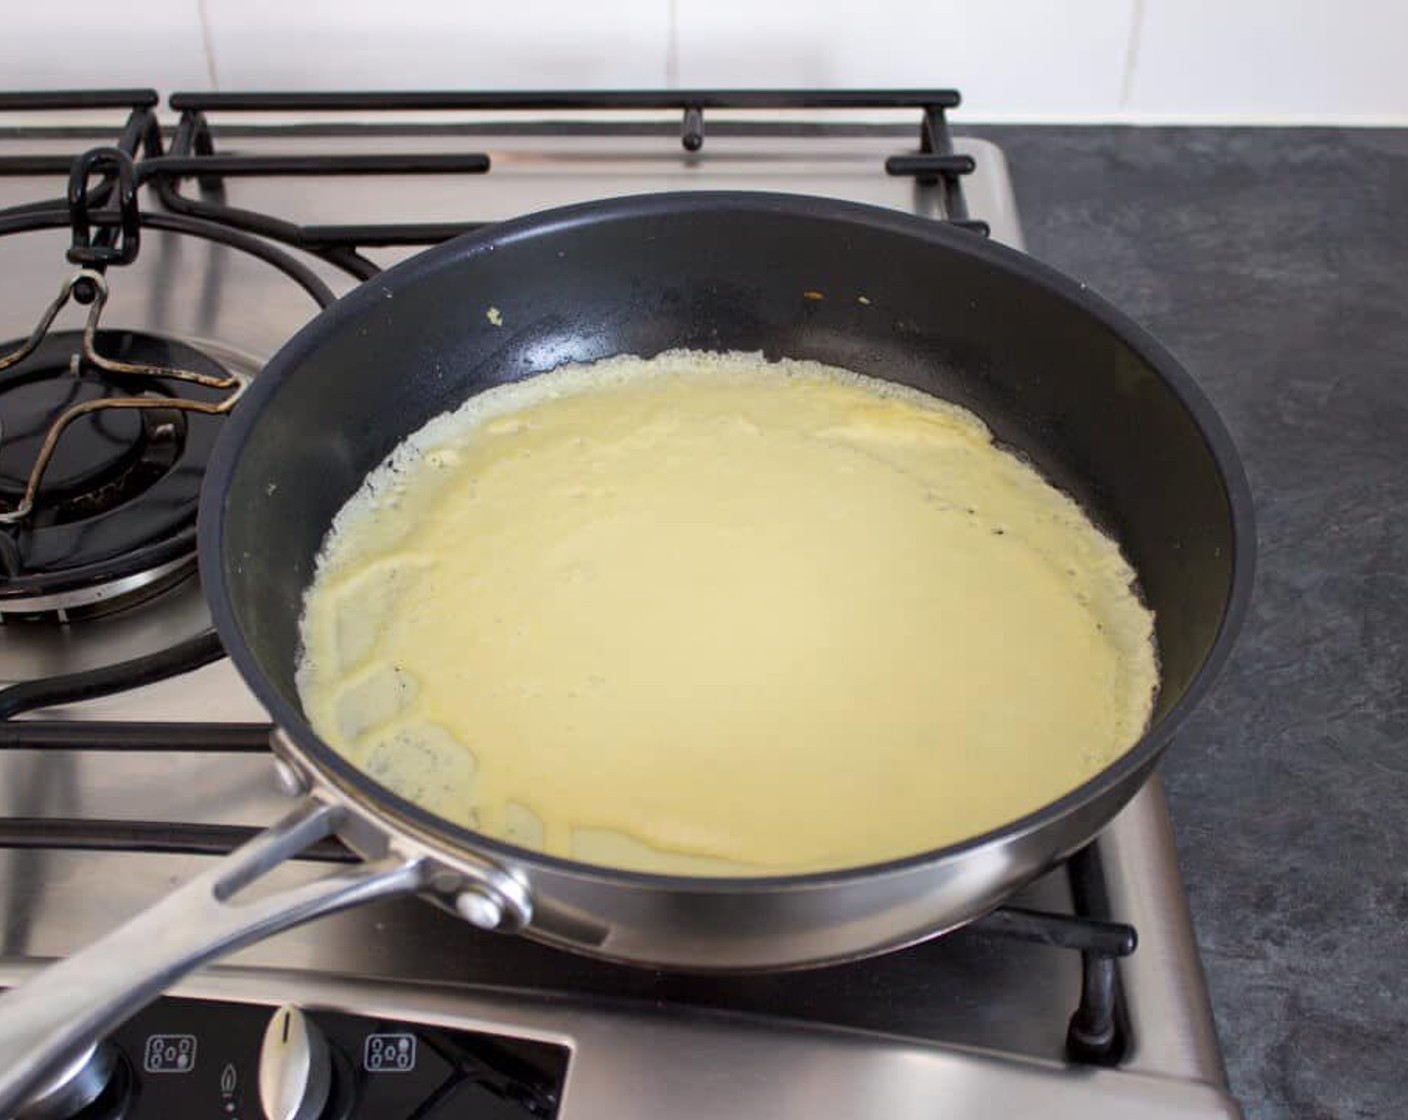 step 6 Pour in roughly 100ml of batter. Immediately swirl the mixture around the pan to even it out. This needs to be done very quickly, or you will end up with thin & thick parts.